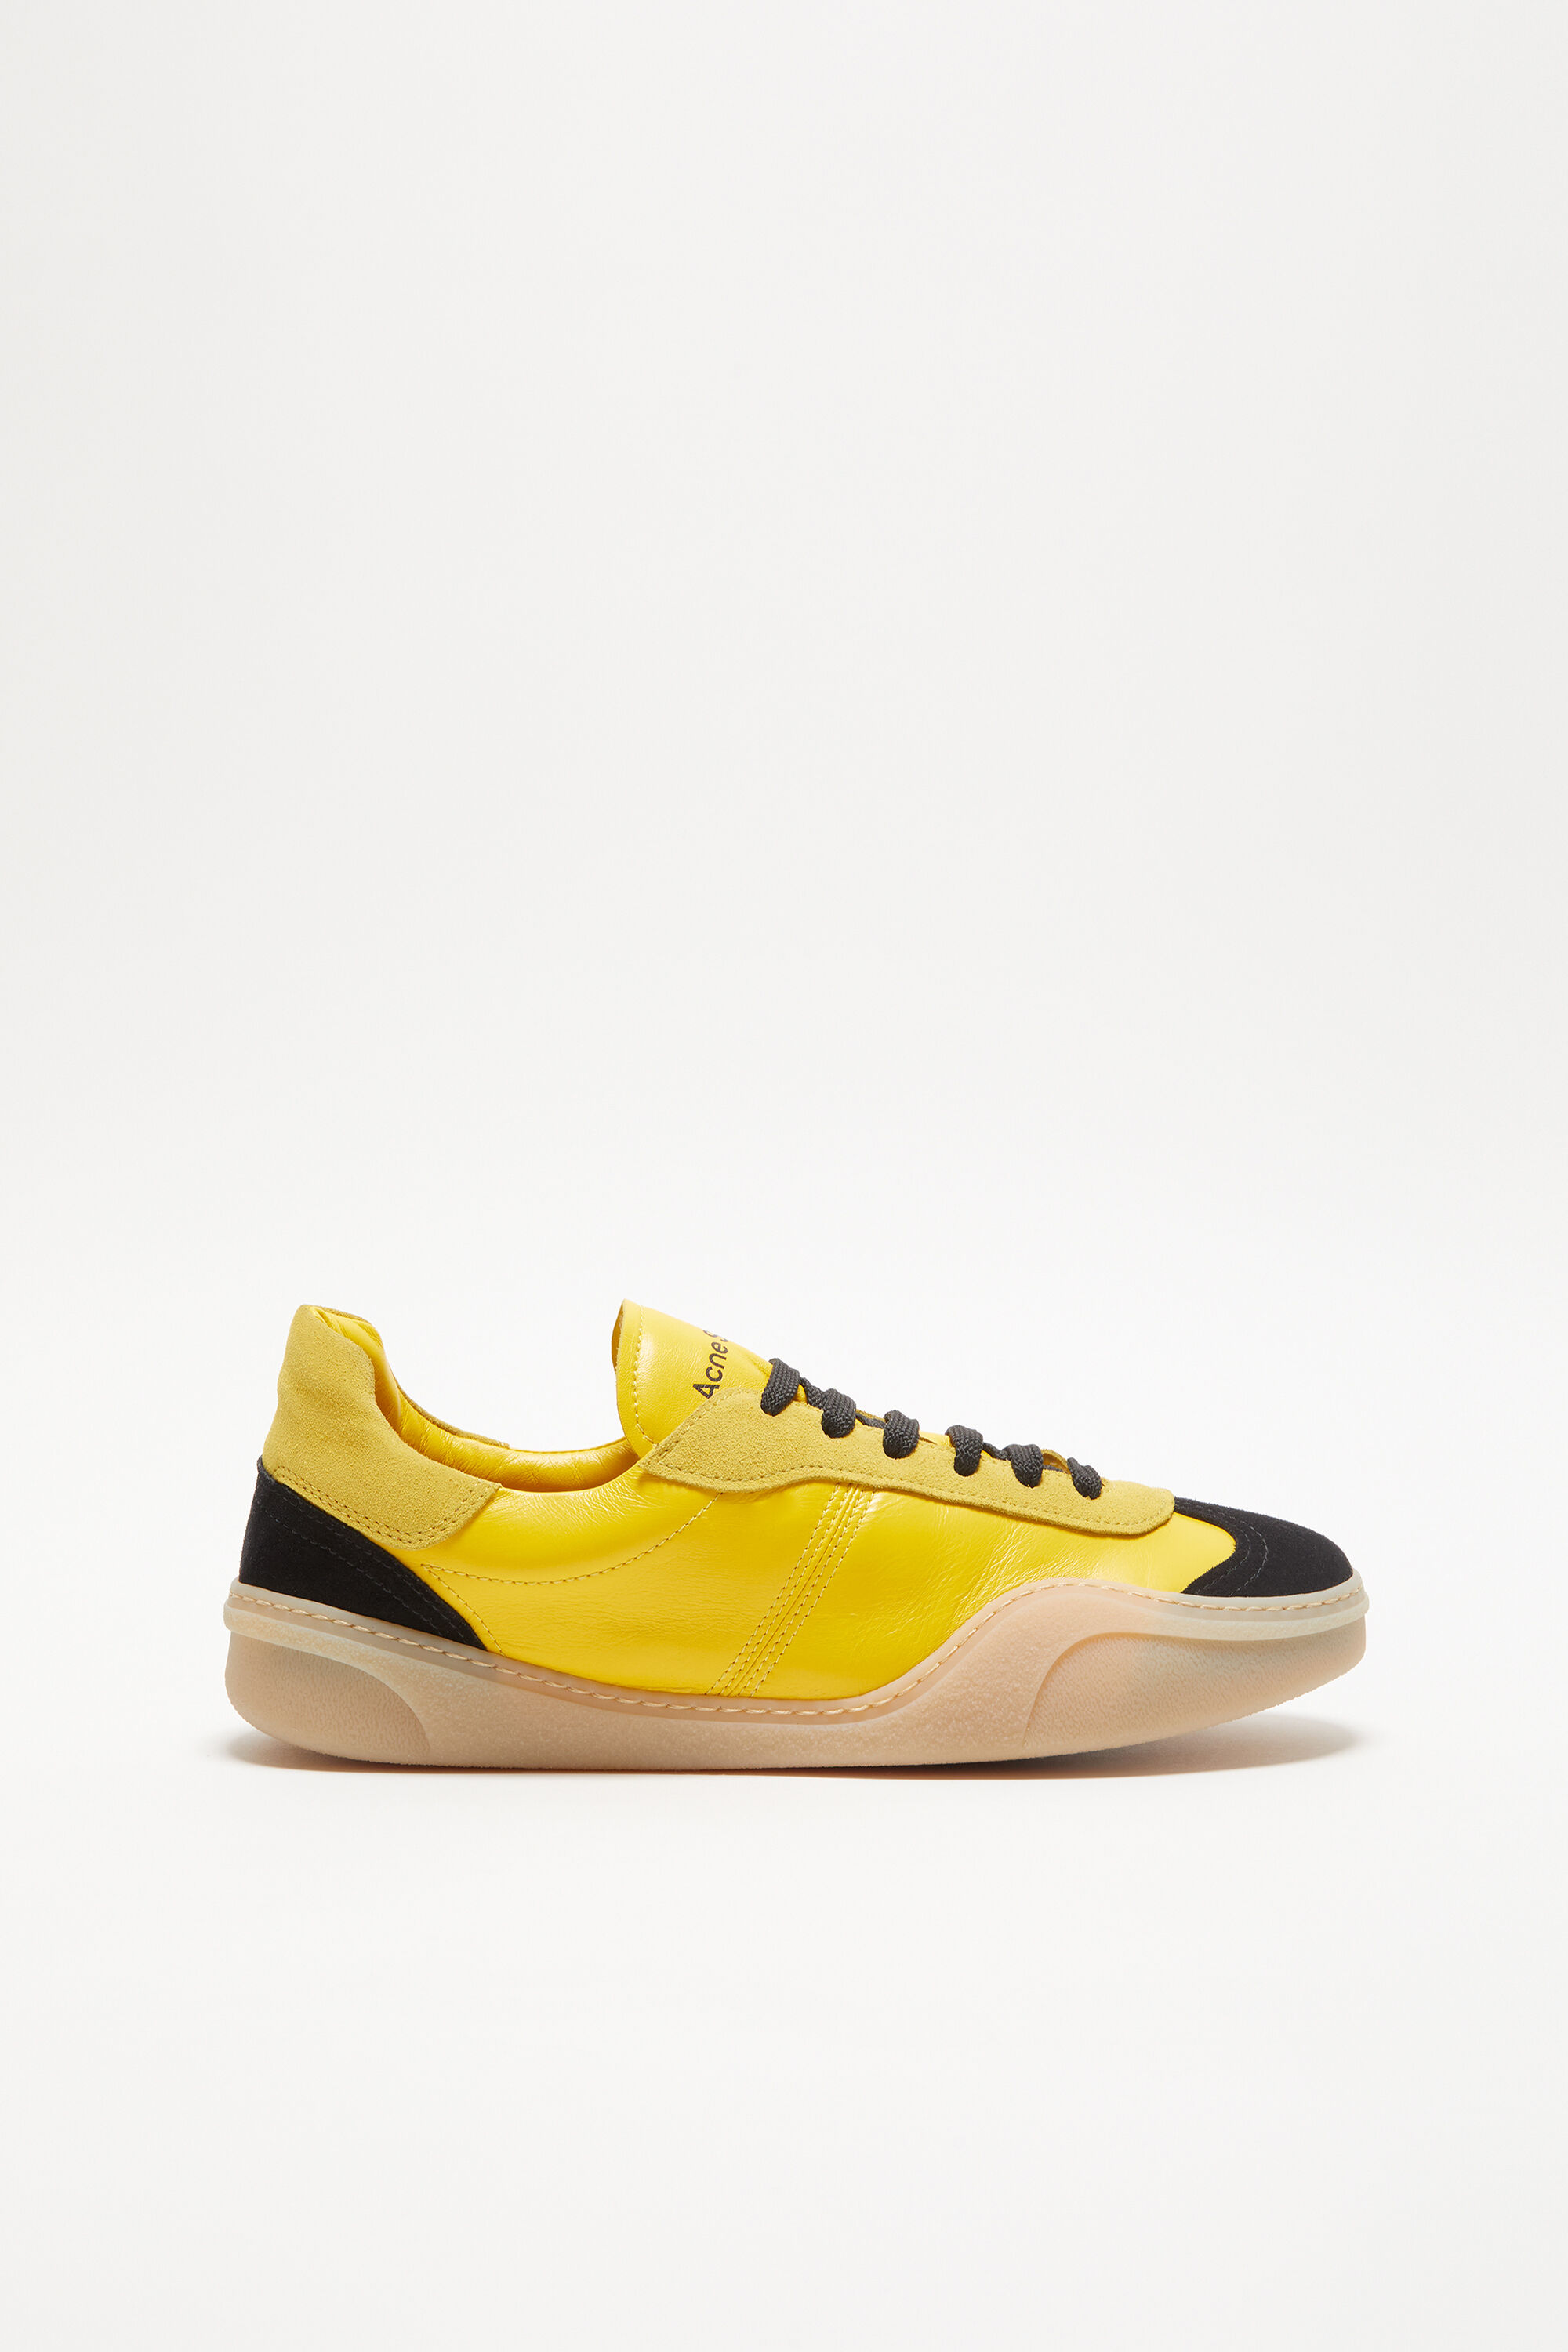 Acne Studios - Lace-up sneakers - Yellow/black